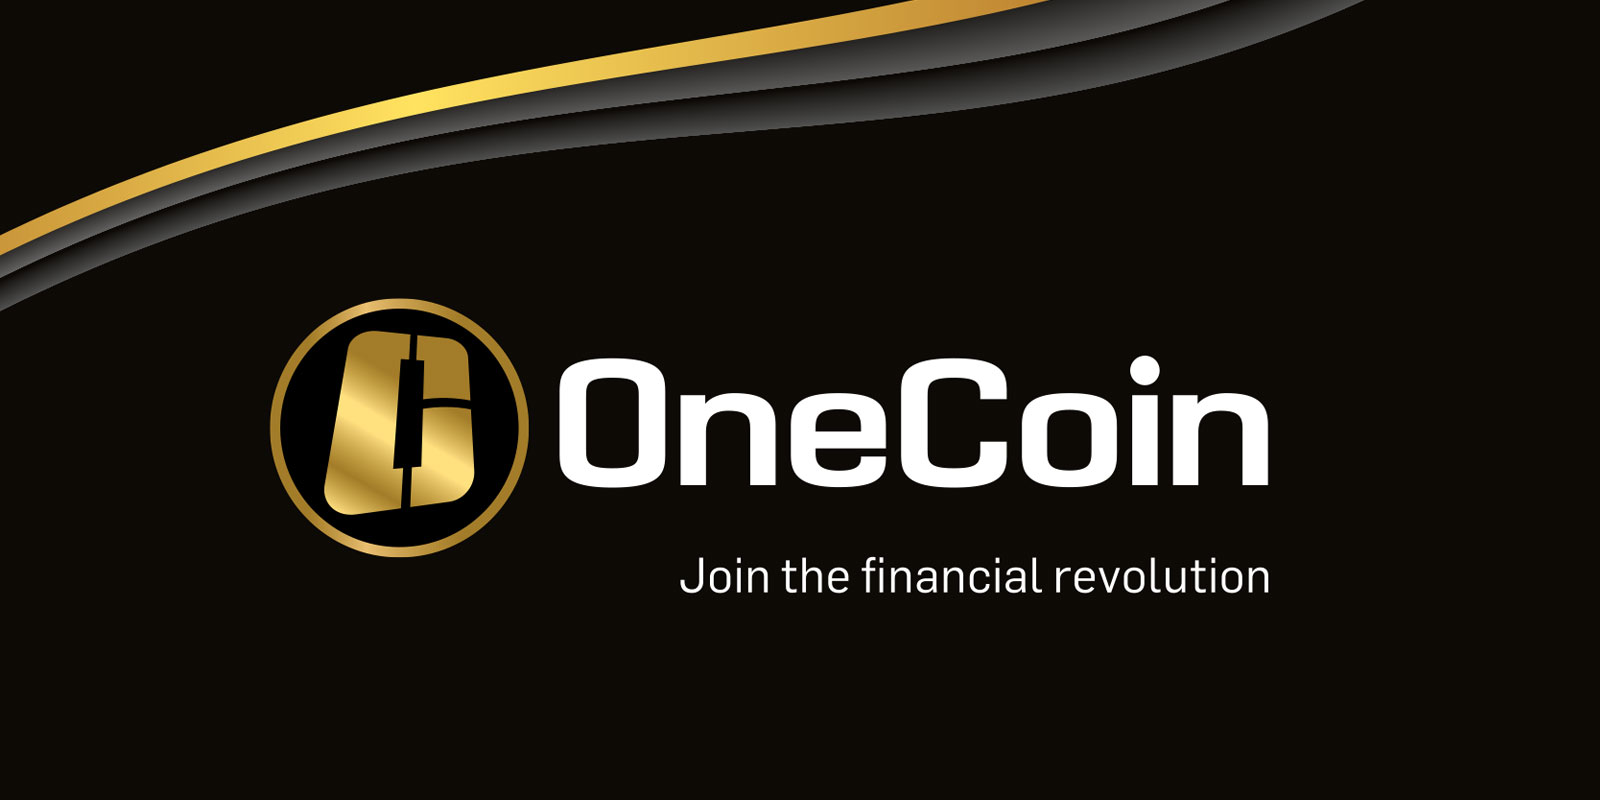 onecoin cryptocurrency future